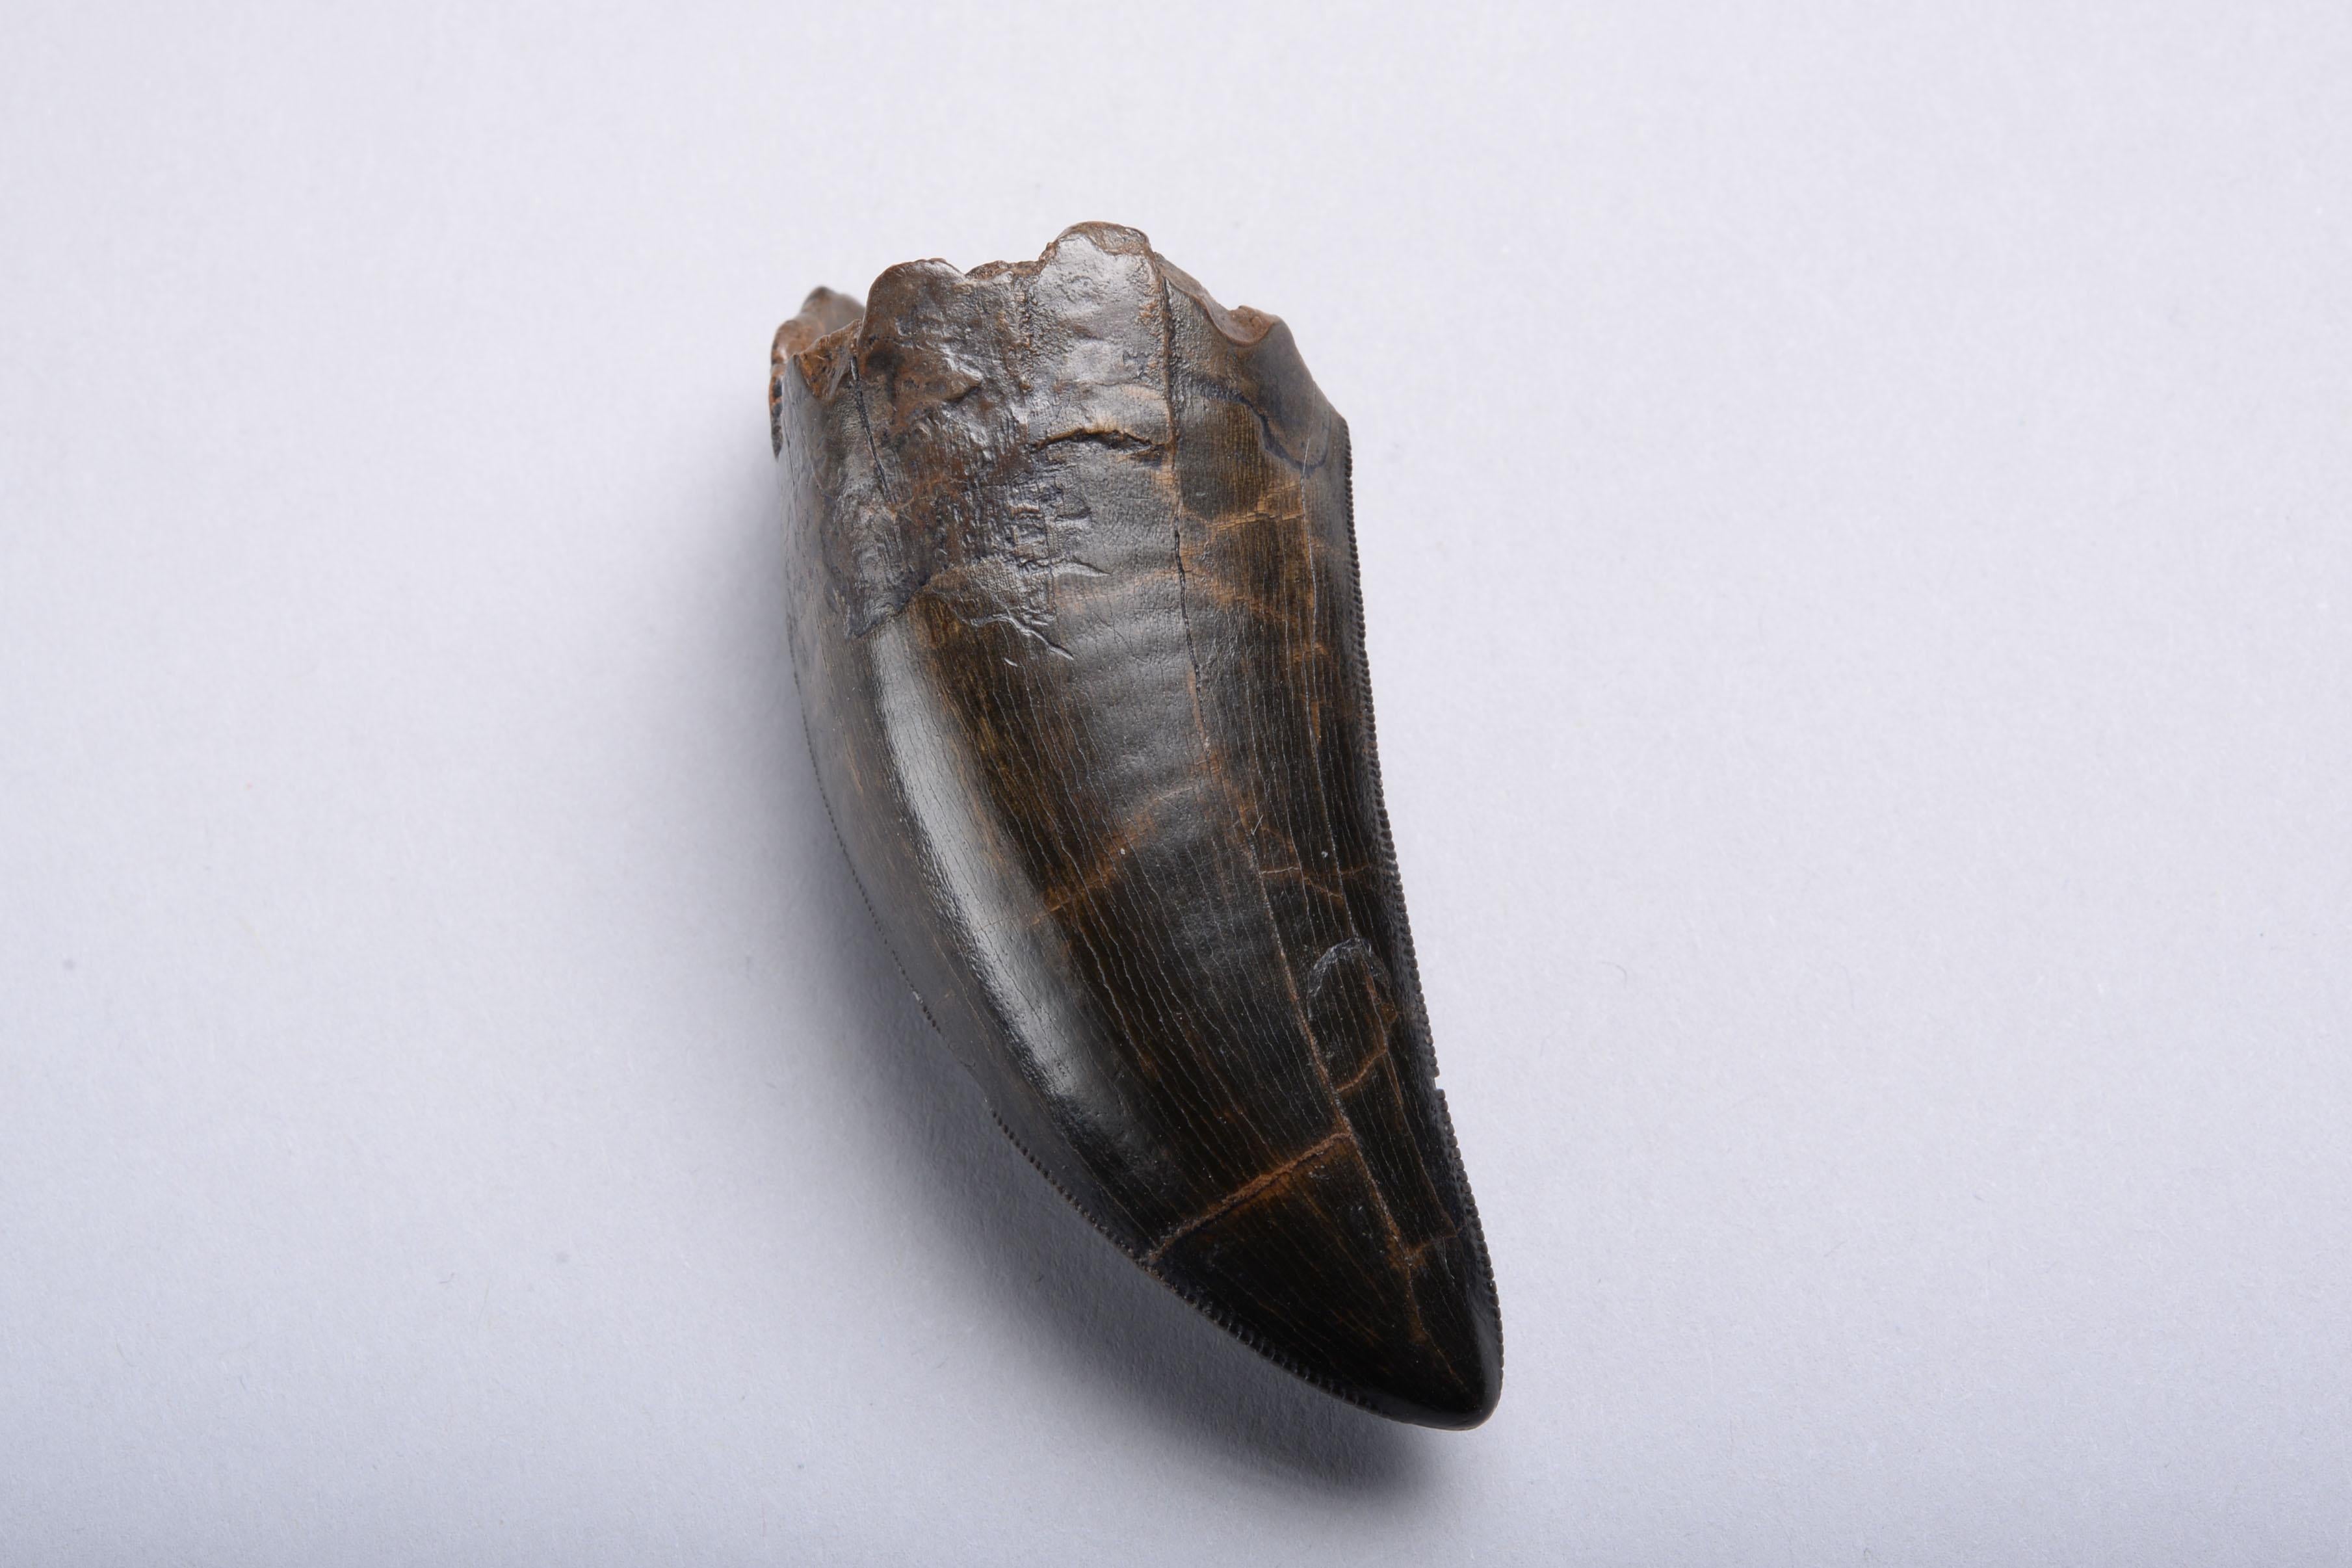 The tooth of an adult Tyrannosaurus Rex, dating to the Late Cretaceous, approximately 67 million years ago. Found on private land, Hell Creek Formation, Powder River County, Montana.

A large, beautifully preserved maxillary tooth, with